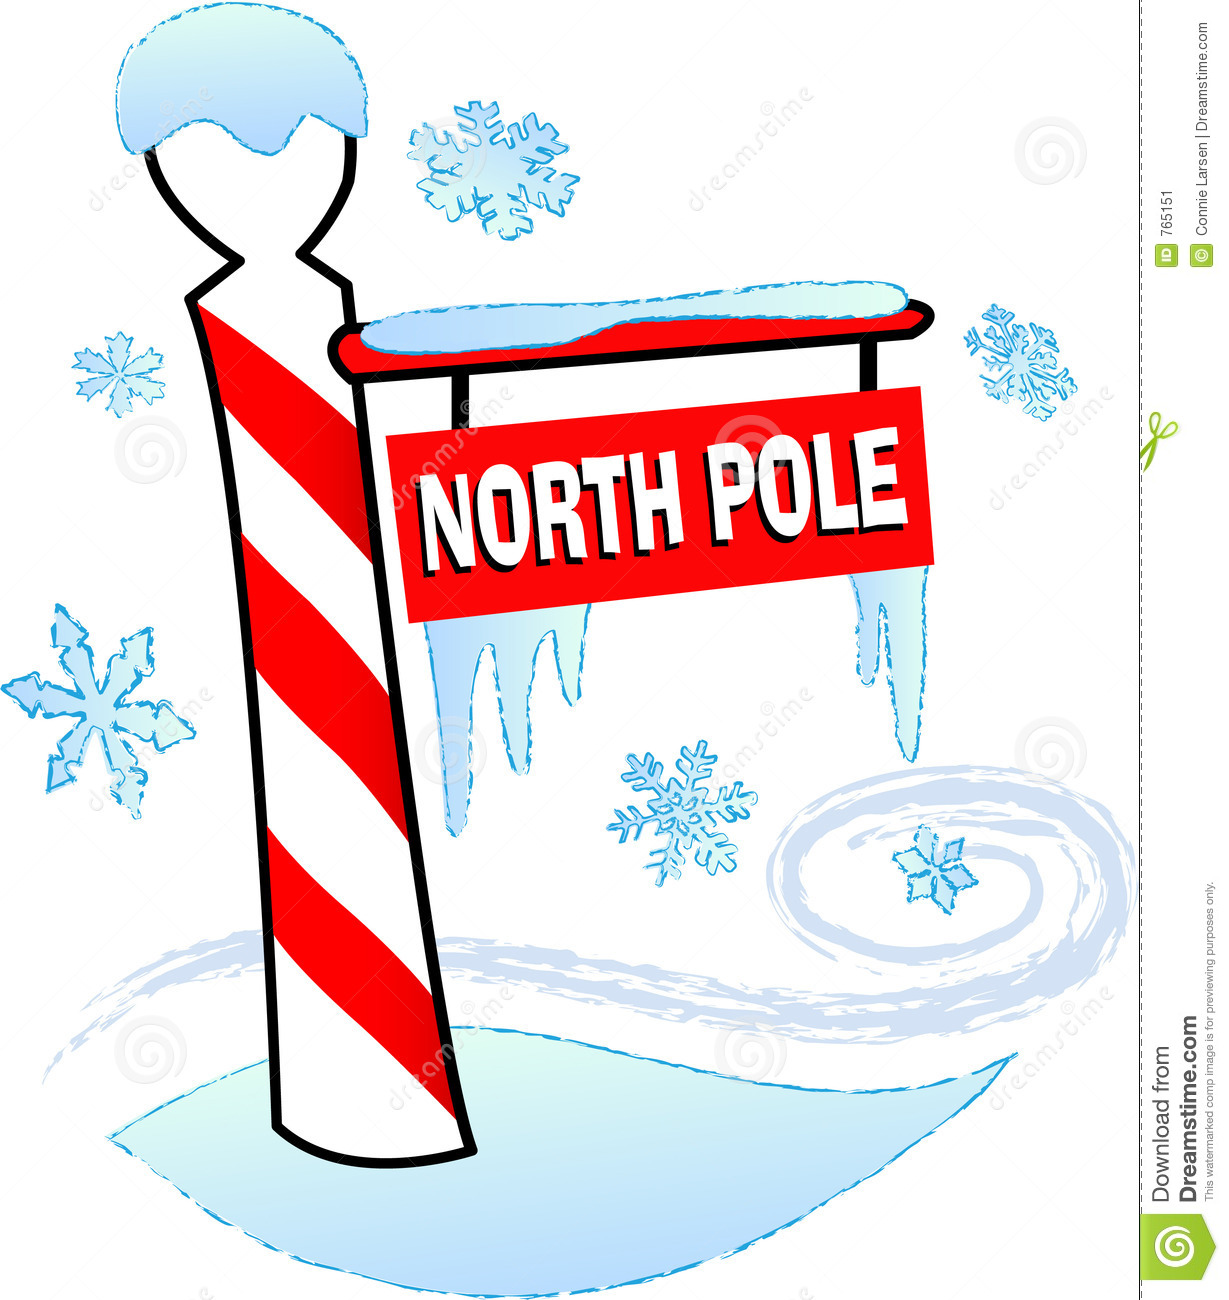 North Pole sign with a red an